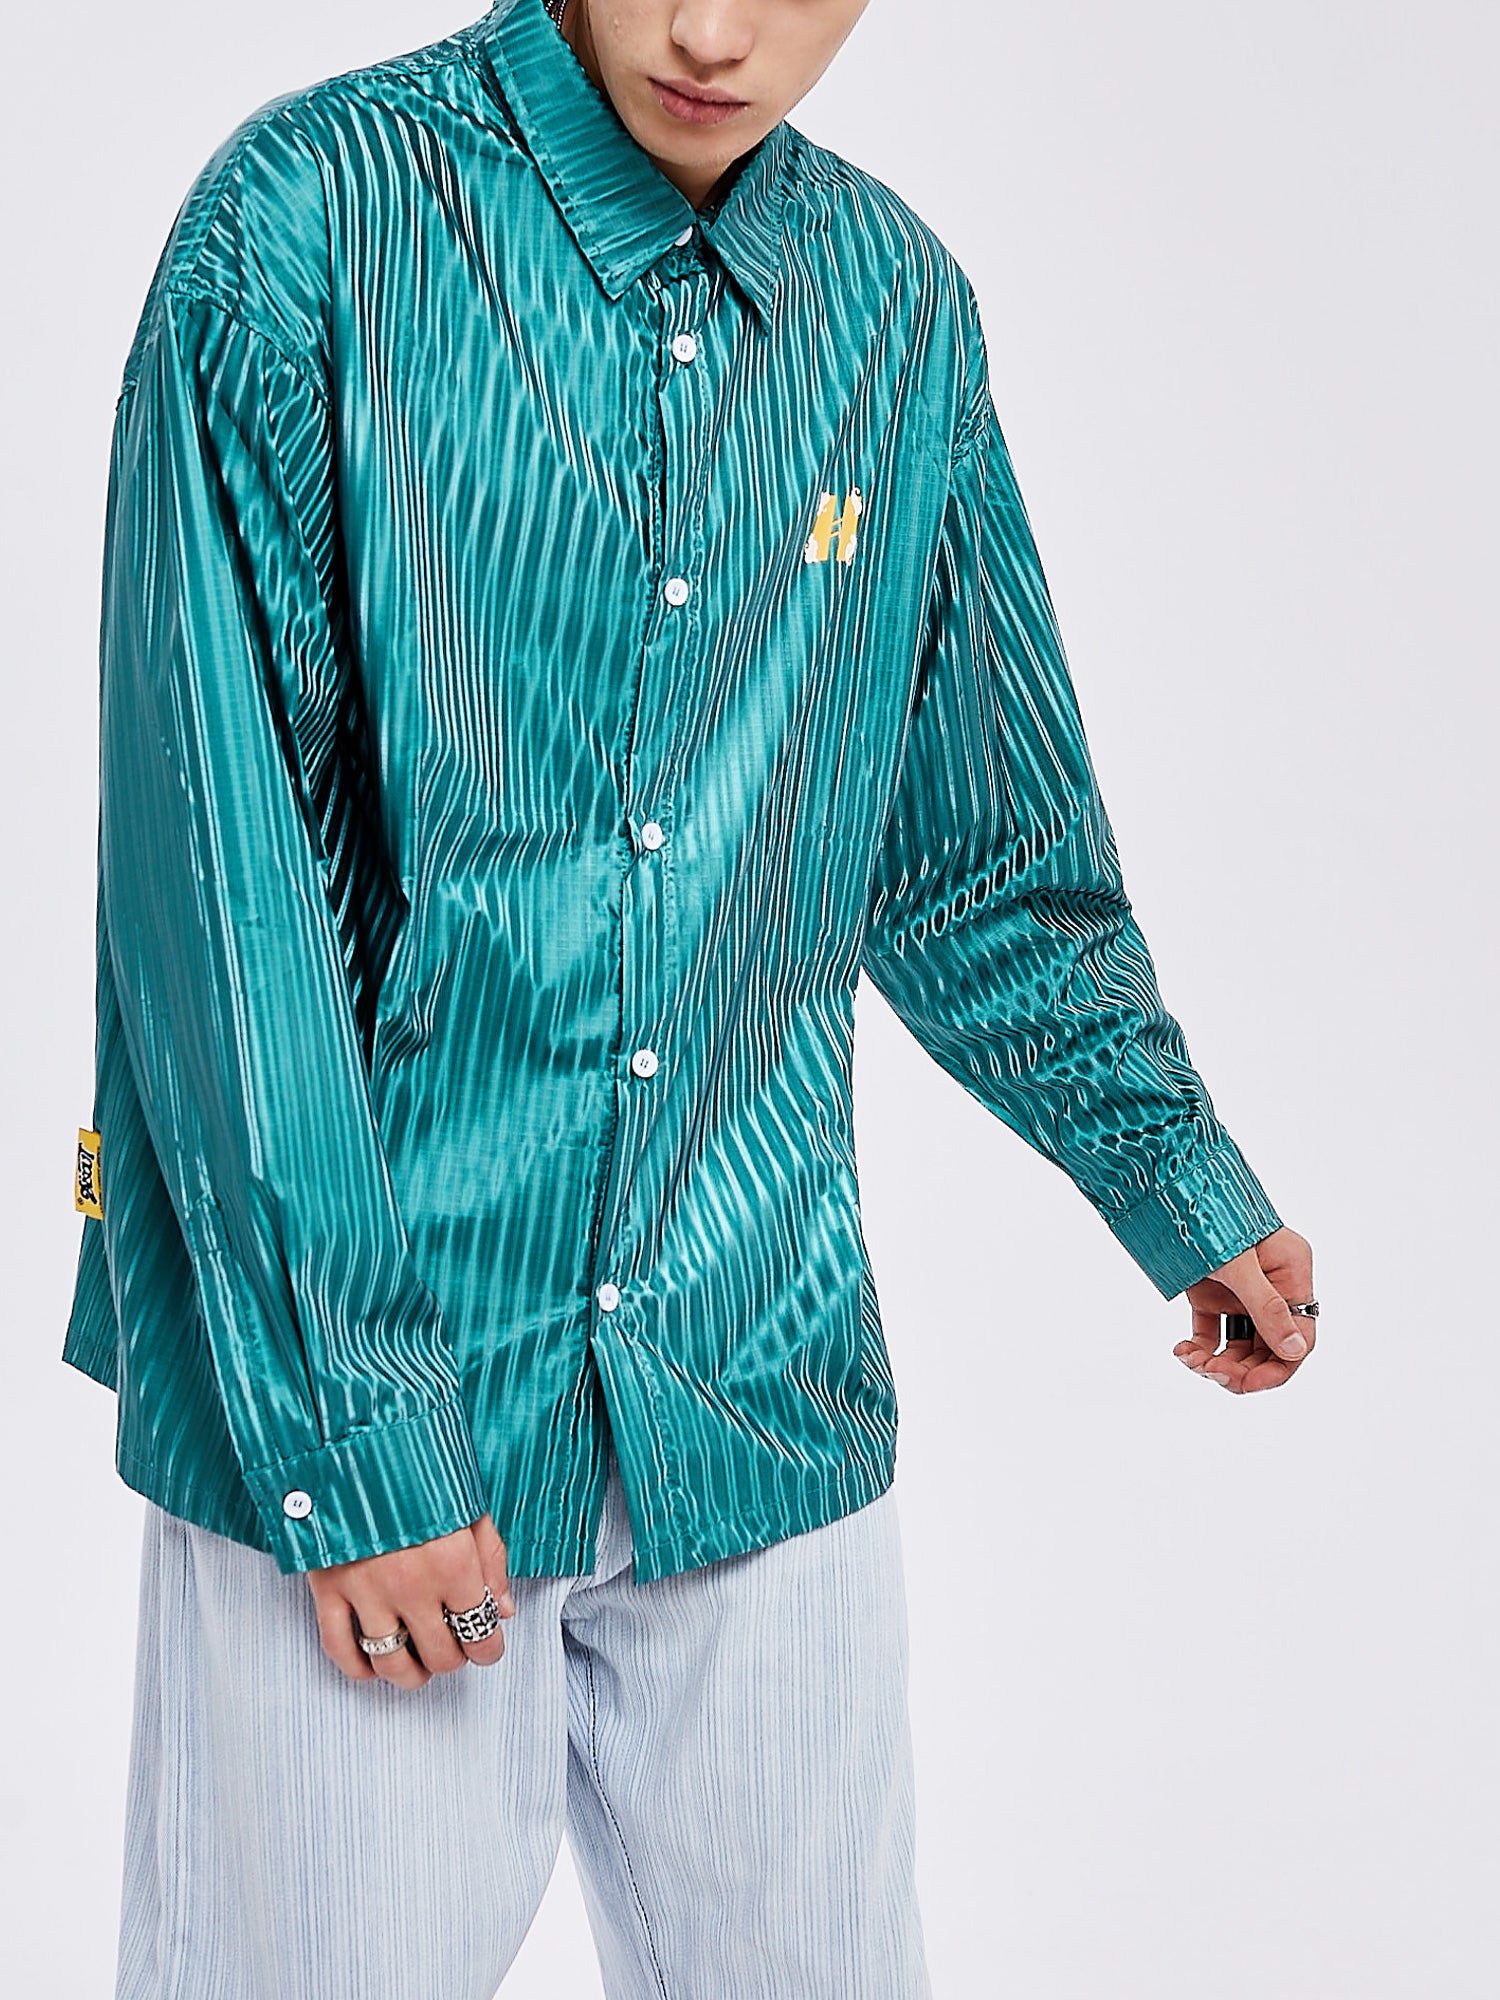 JUSTNOTAG Street Fashion Hiphop Striped Polyester Turn-down Collar Green Shirts